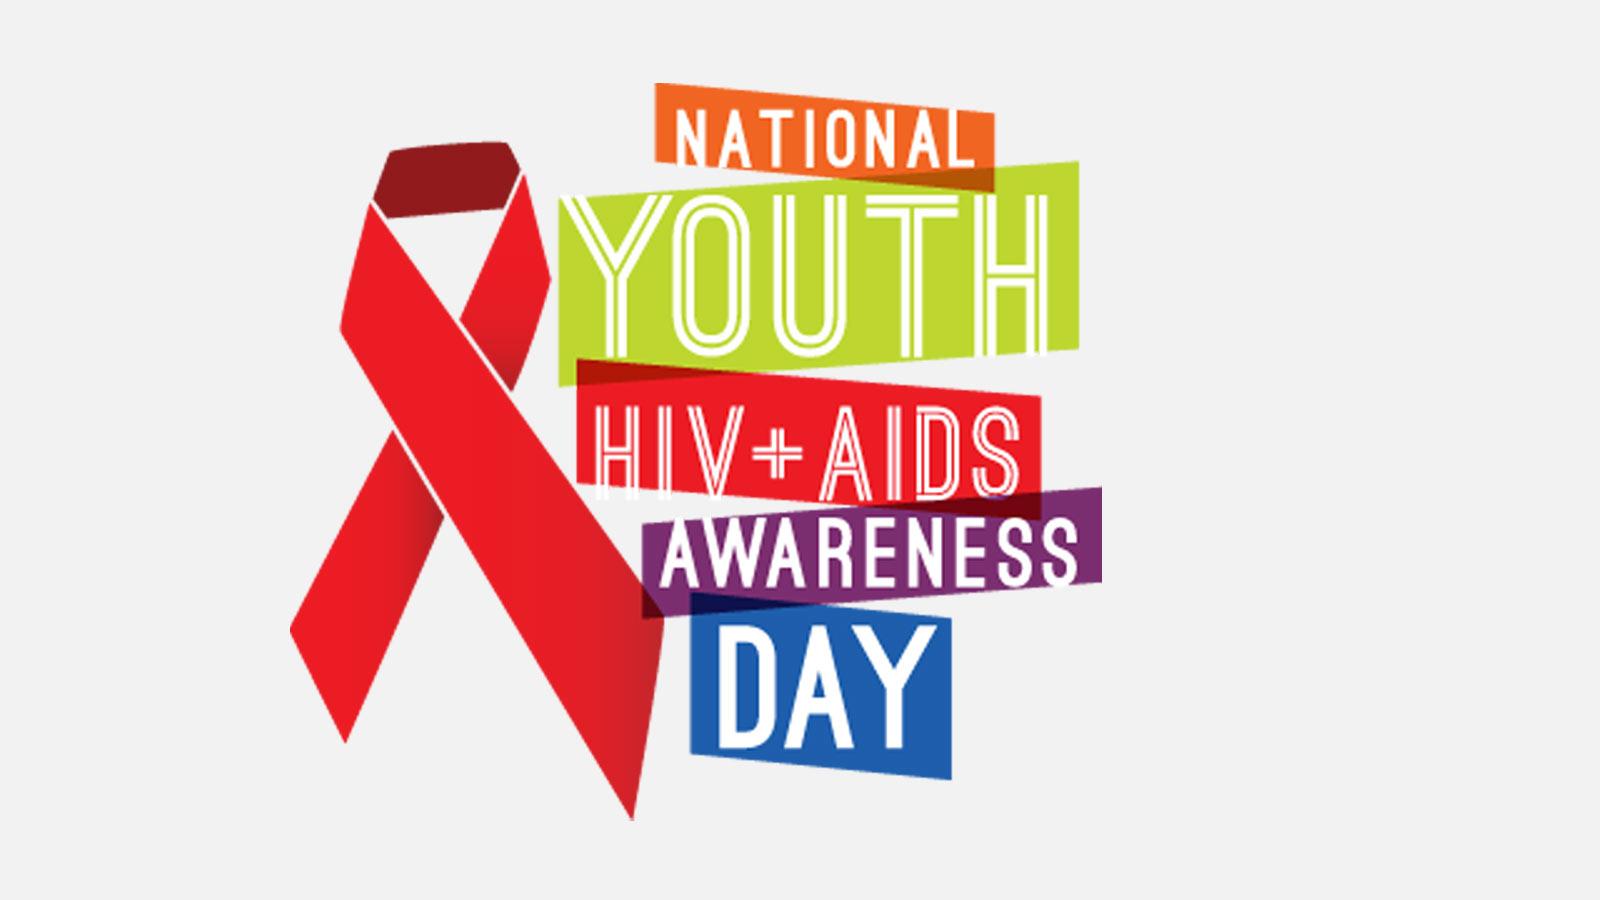 Ryan White and National Youth HIV and AIDS Awareness Day